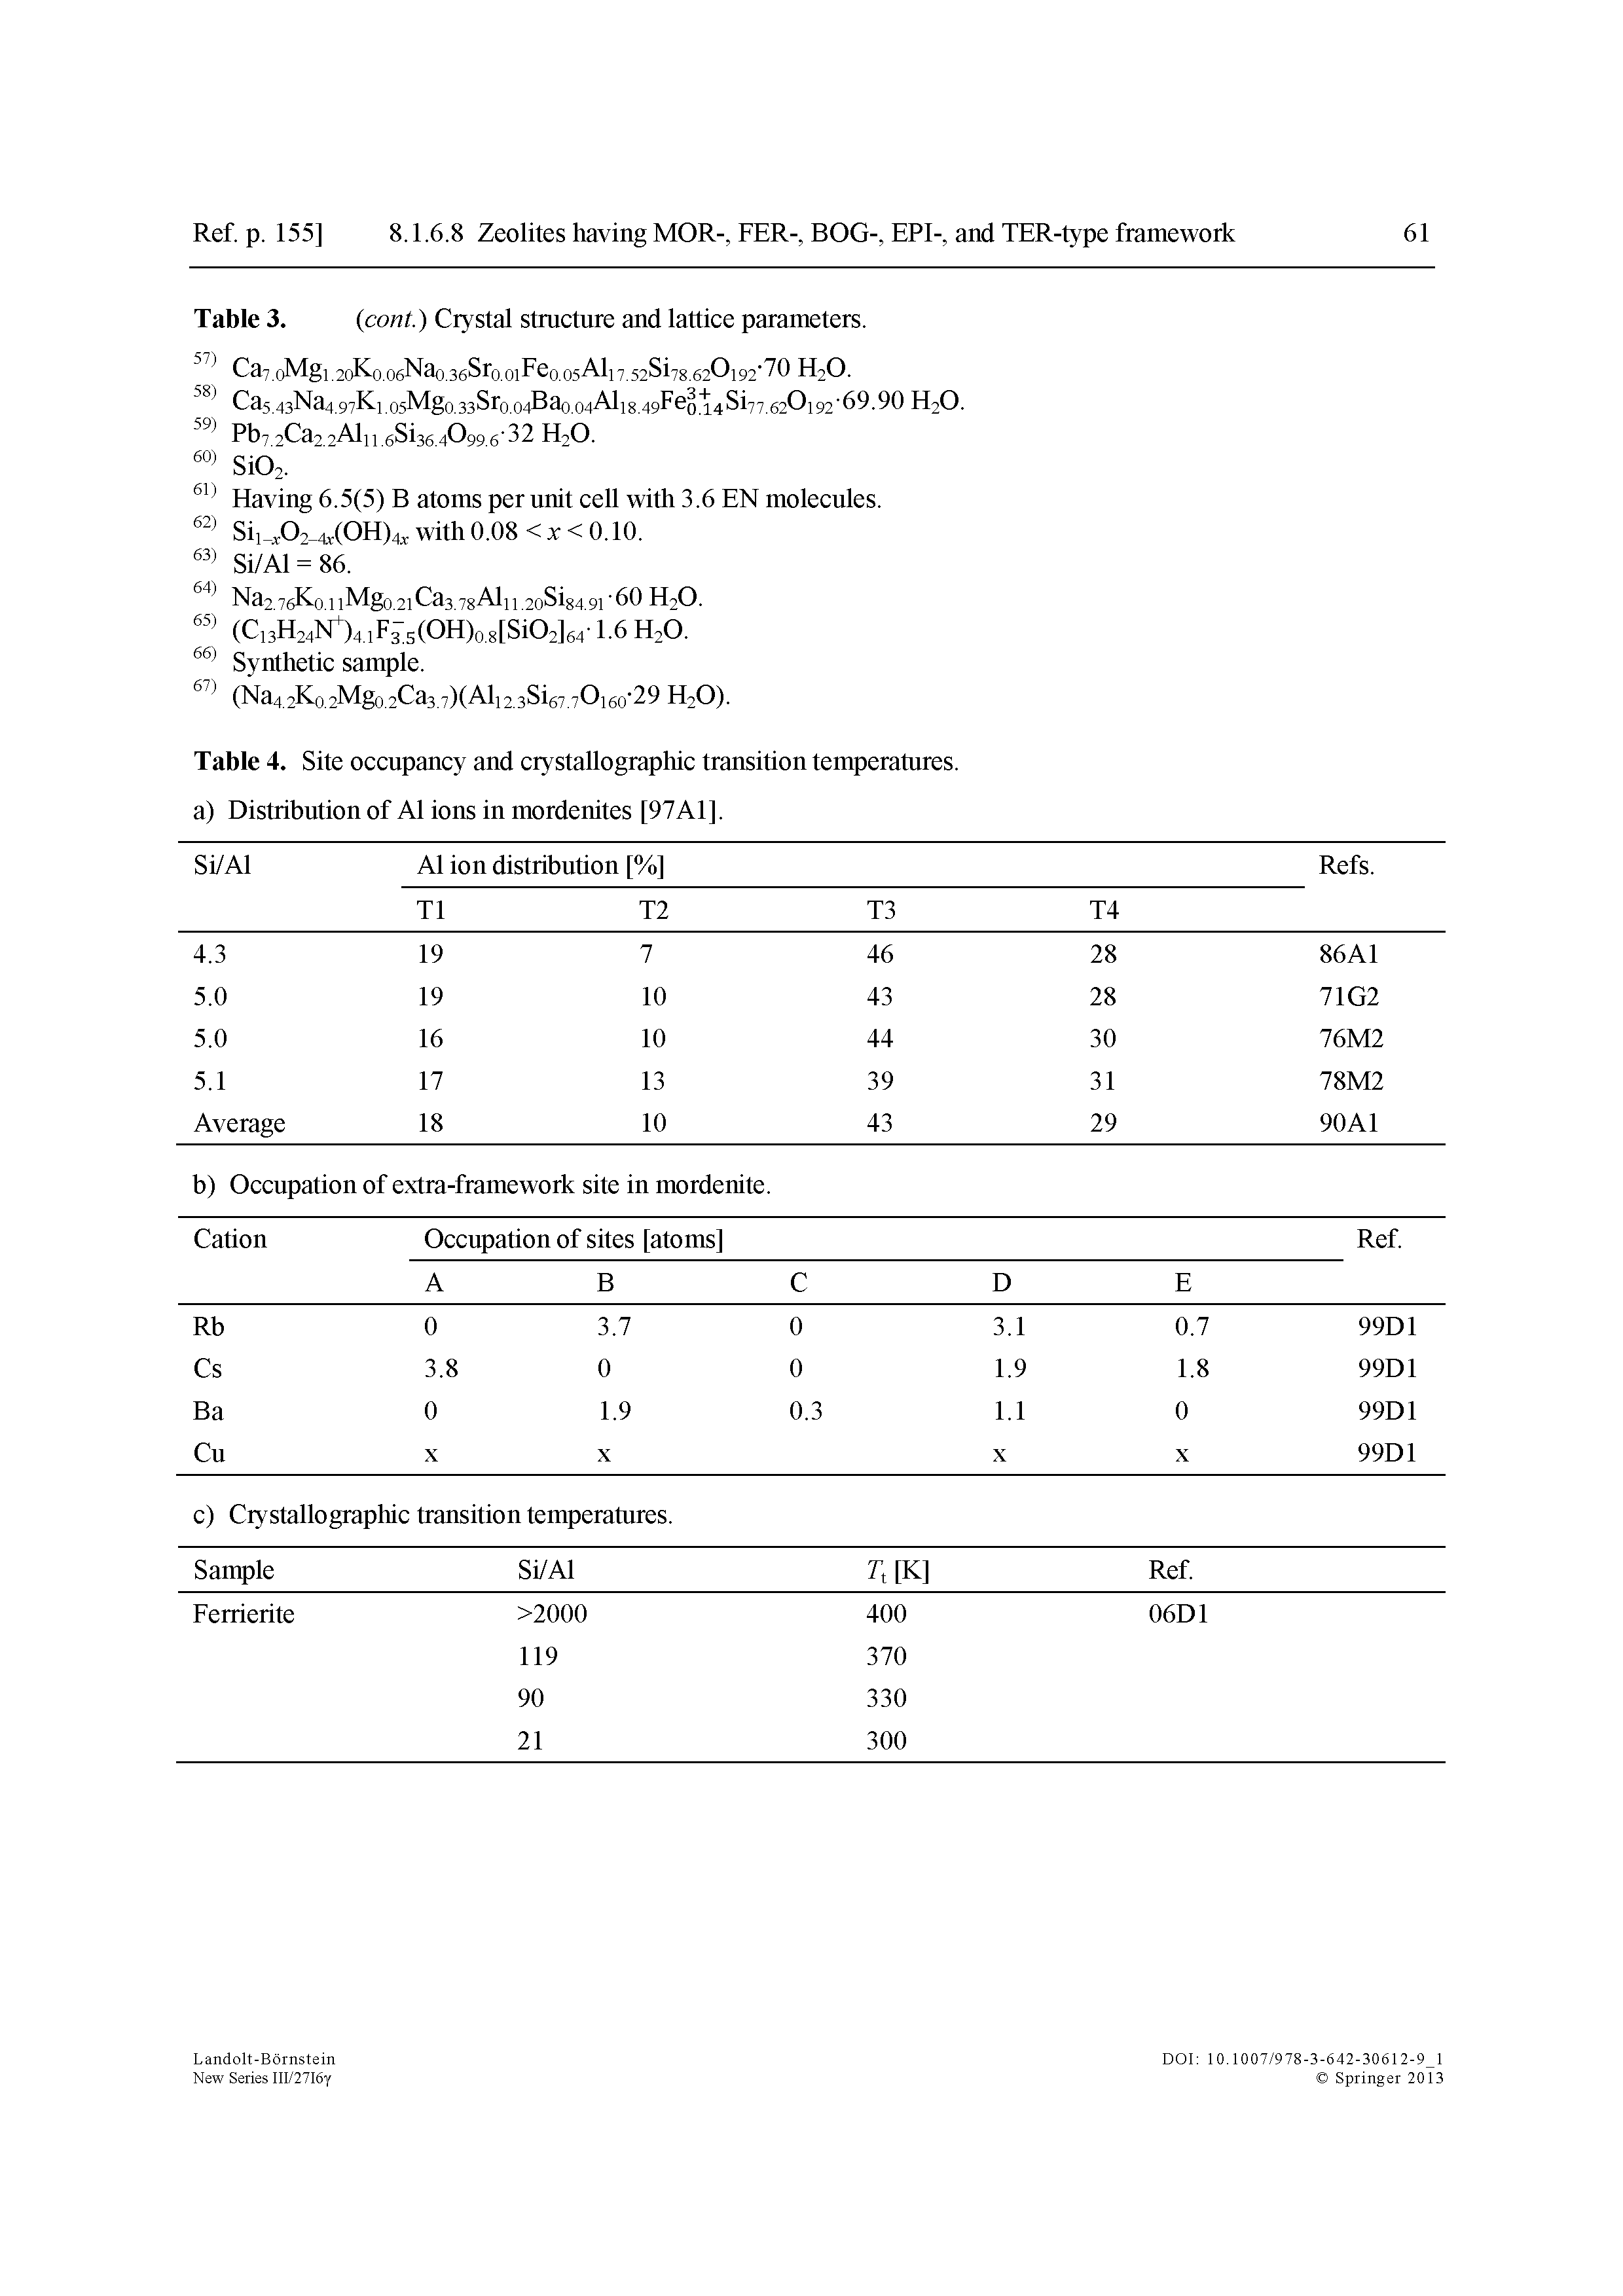 Table 4. Site occnpancy and crystallographic transition temperatnres. a) Distribntion of A1 ions in mordenites [97A1].